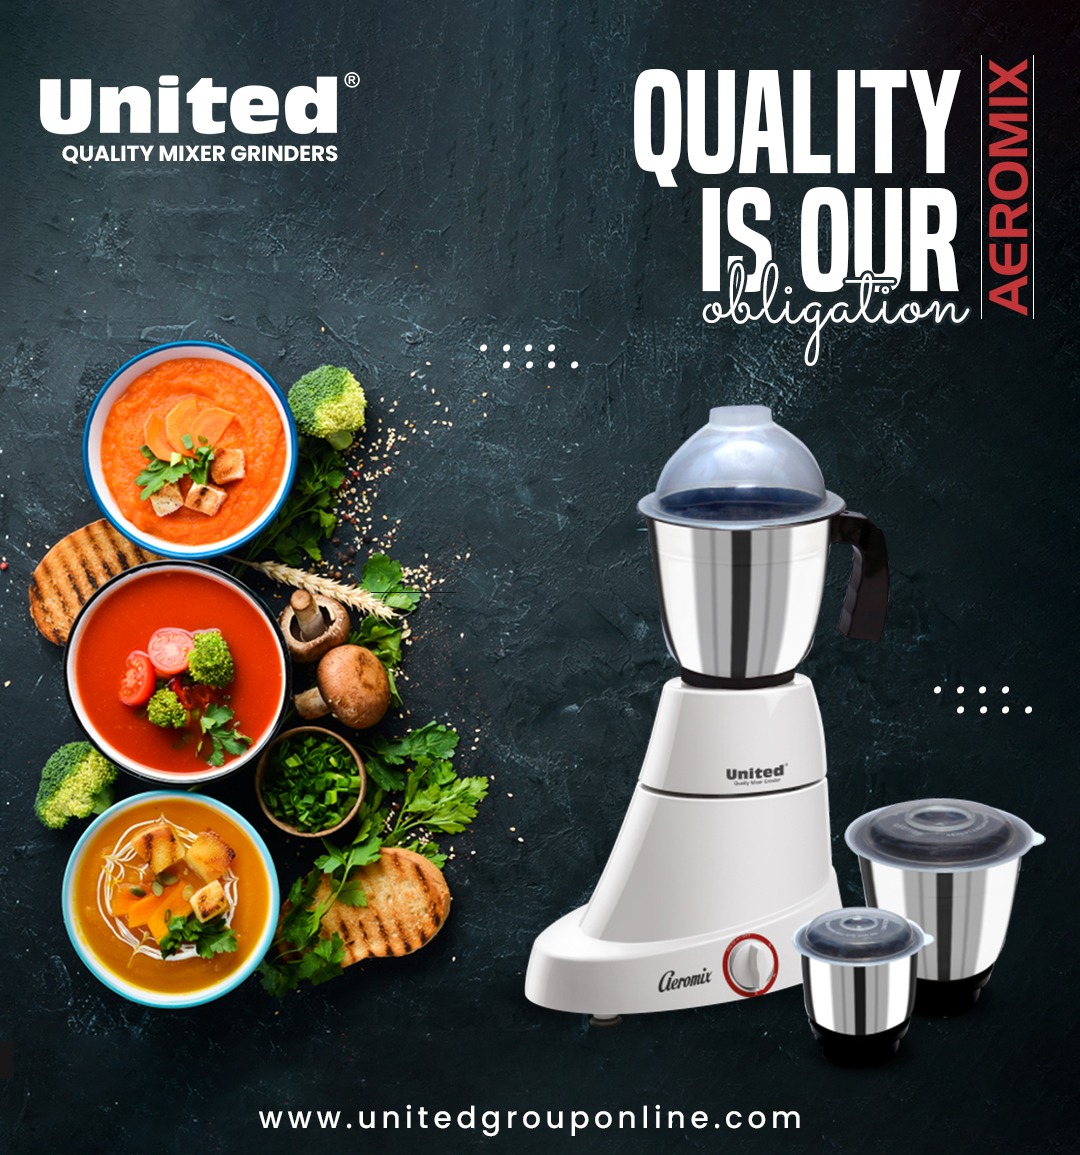 Quality is our OBLIGATION. 
.
 .
 .
 #United #Cookers #Cookware #PressureCookers #HealthyCooking #Deep #roundedkadai #RoundedTawa #Wok #Stwe #Pot #StainlessSteel #Durable #Reliable #PremiumQuality #Tastyfood #Chefchoice #Qualityproduct #Customersatisfaction #bestproductsever